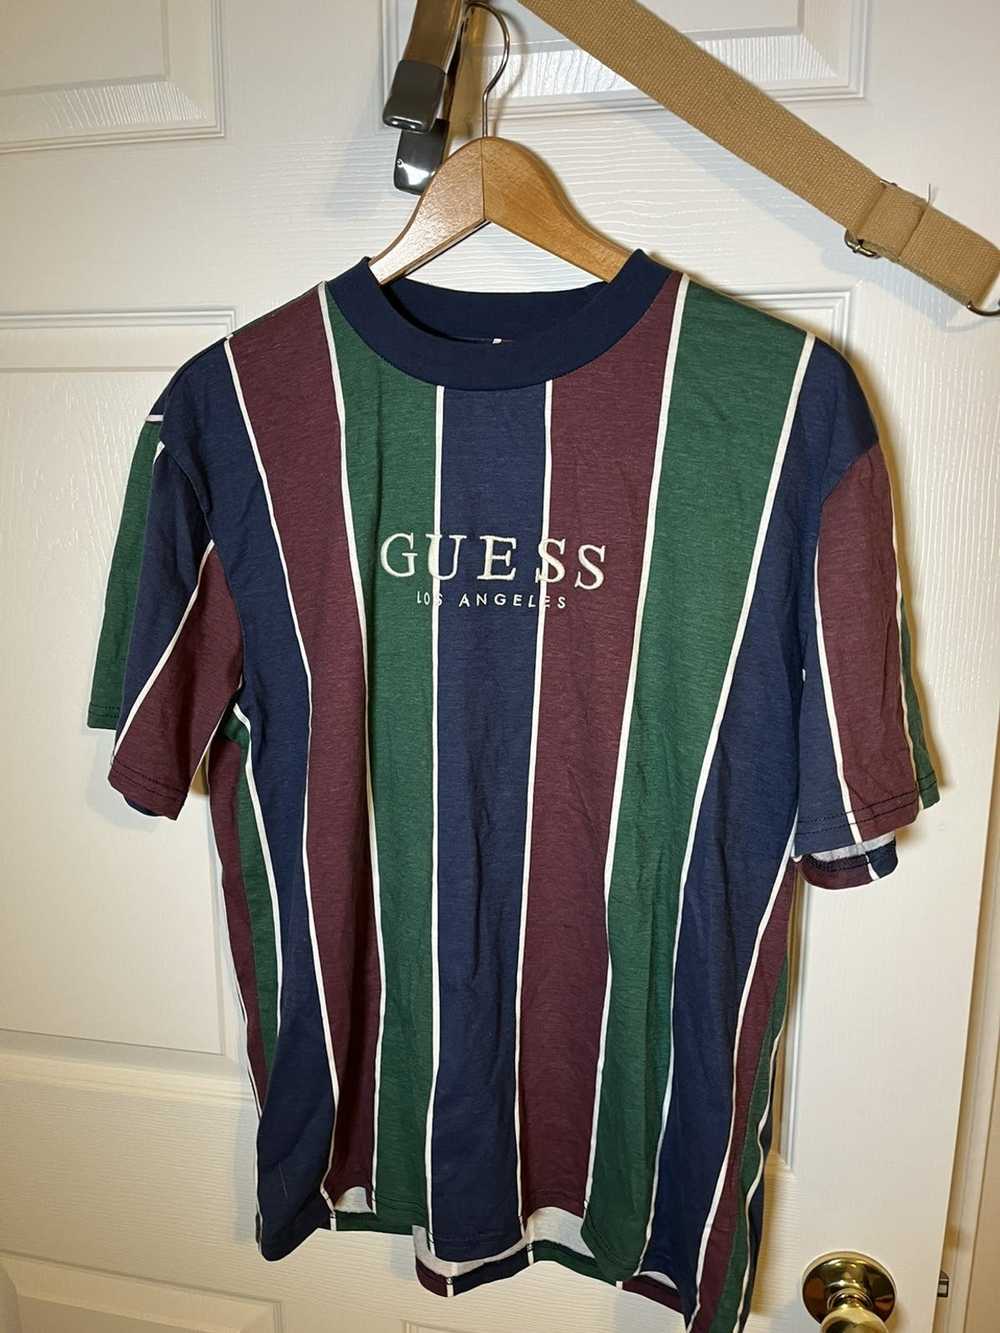 Guess Surfer stripe burgundy, navy, and green - image 2